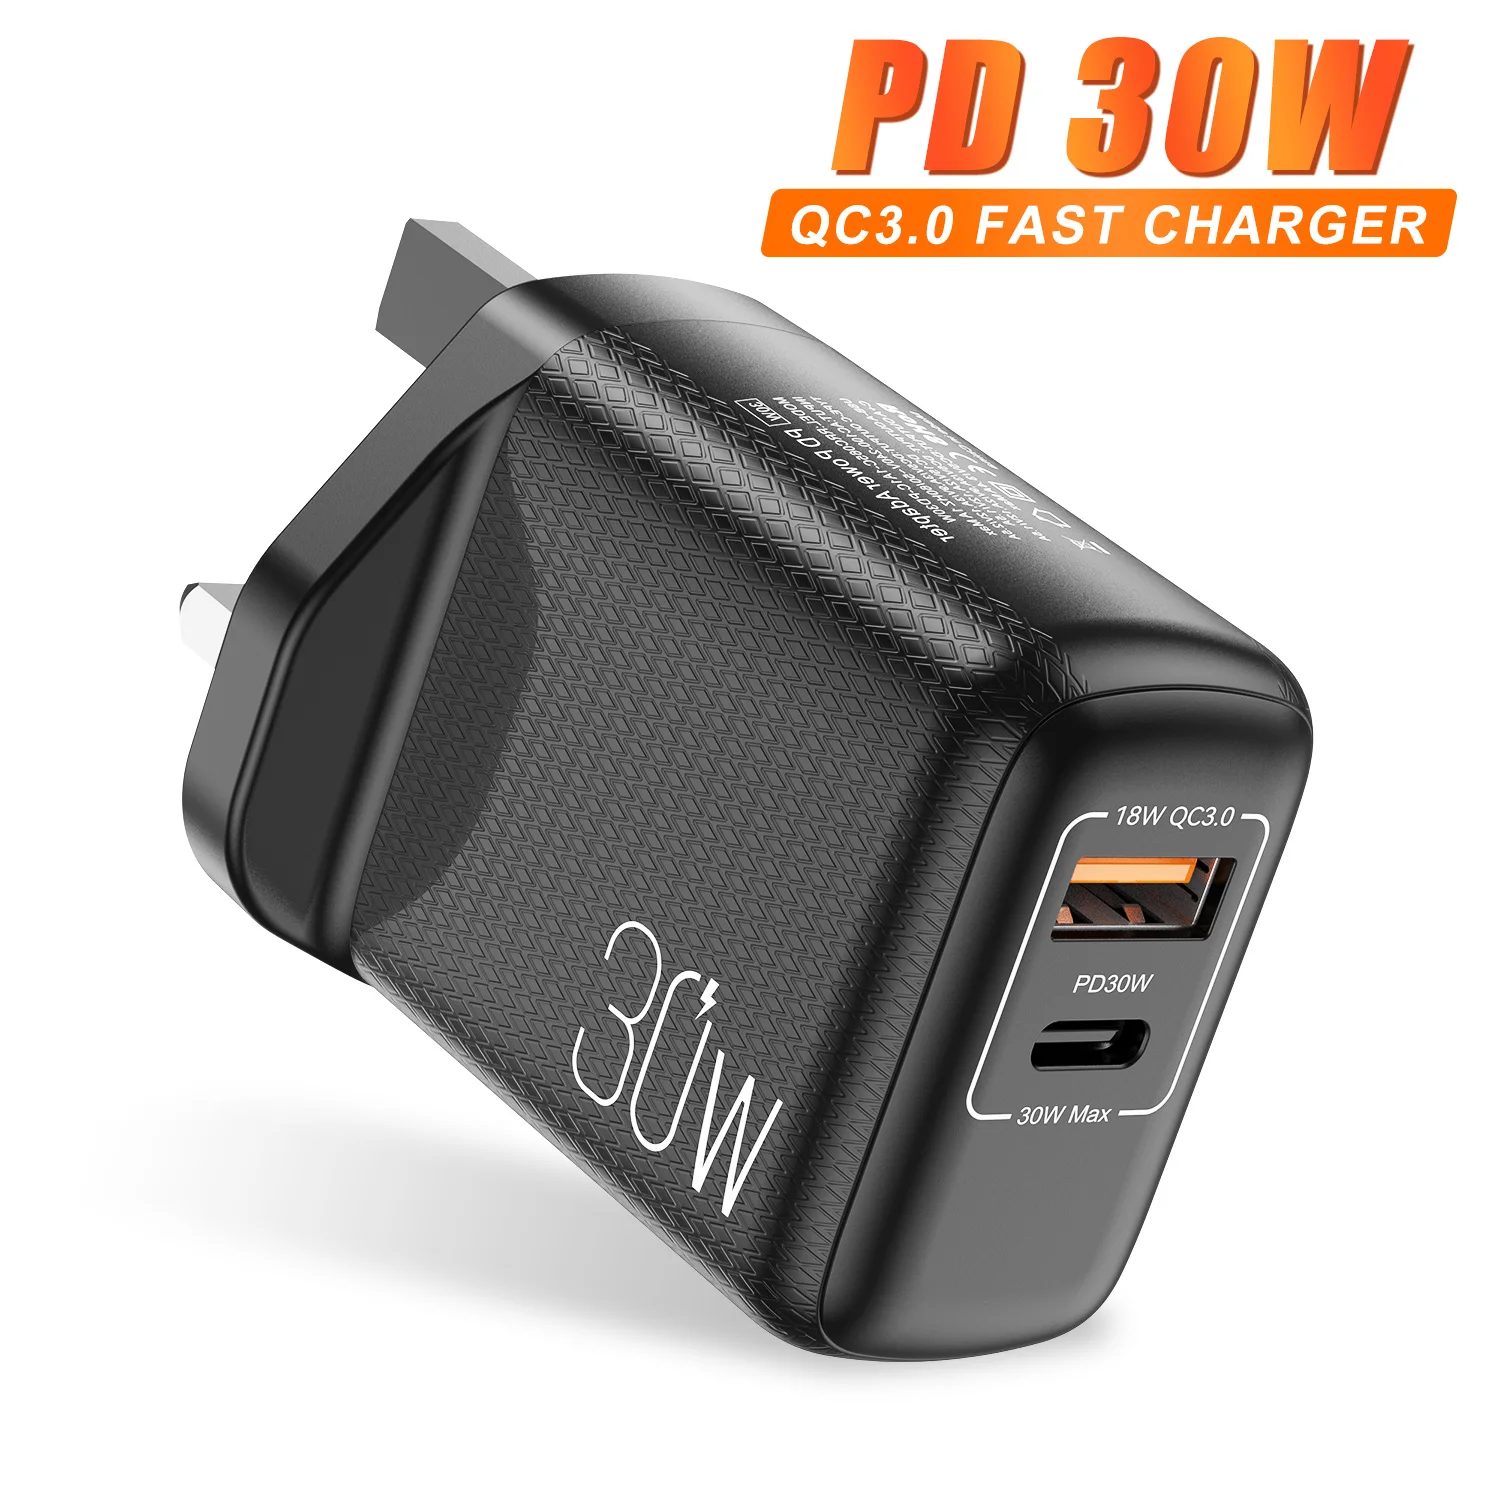 65w charger usb c 2 Ports 30W USB Type C Quick Charge 3.0 QC PD Phone Charger QC3.0 18W PD3.0 Fast Charger For iPhone 13 12 Pro Max Xiaomi Mi 11 usb c 61w Chargers